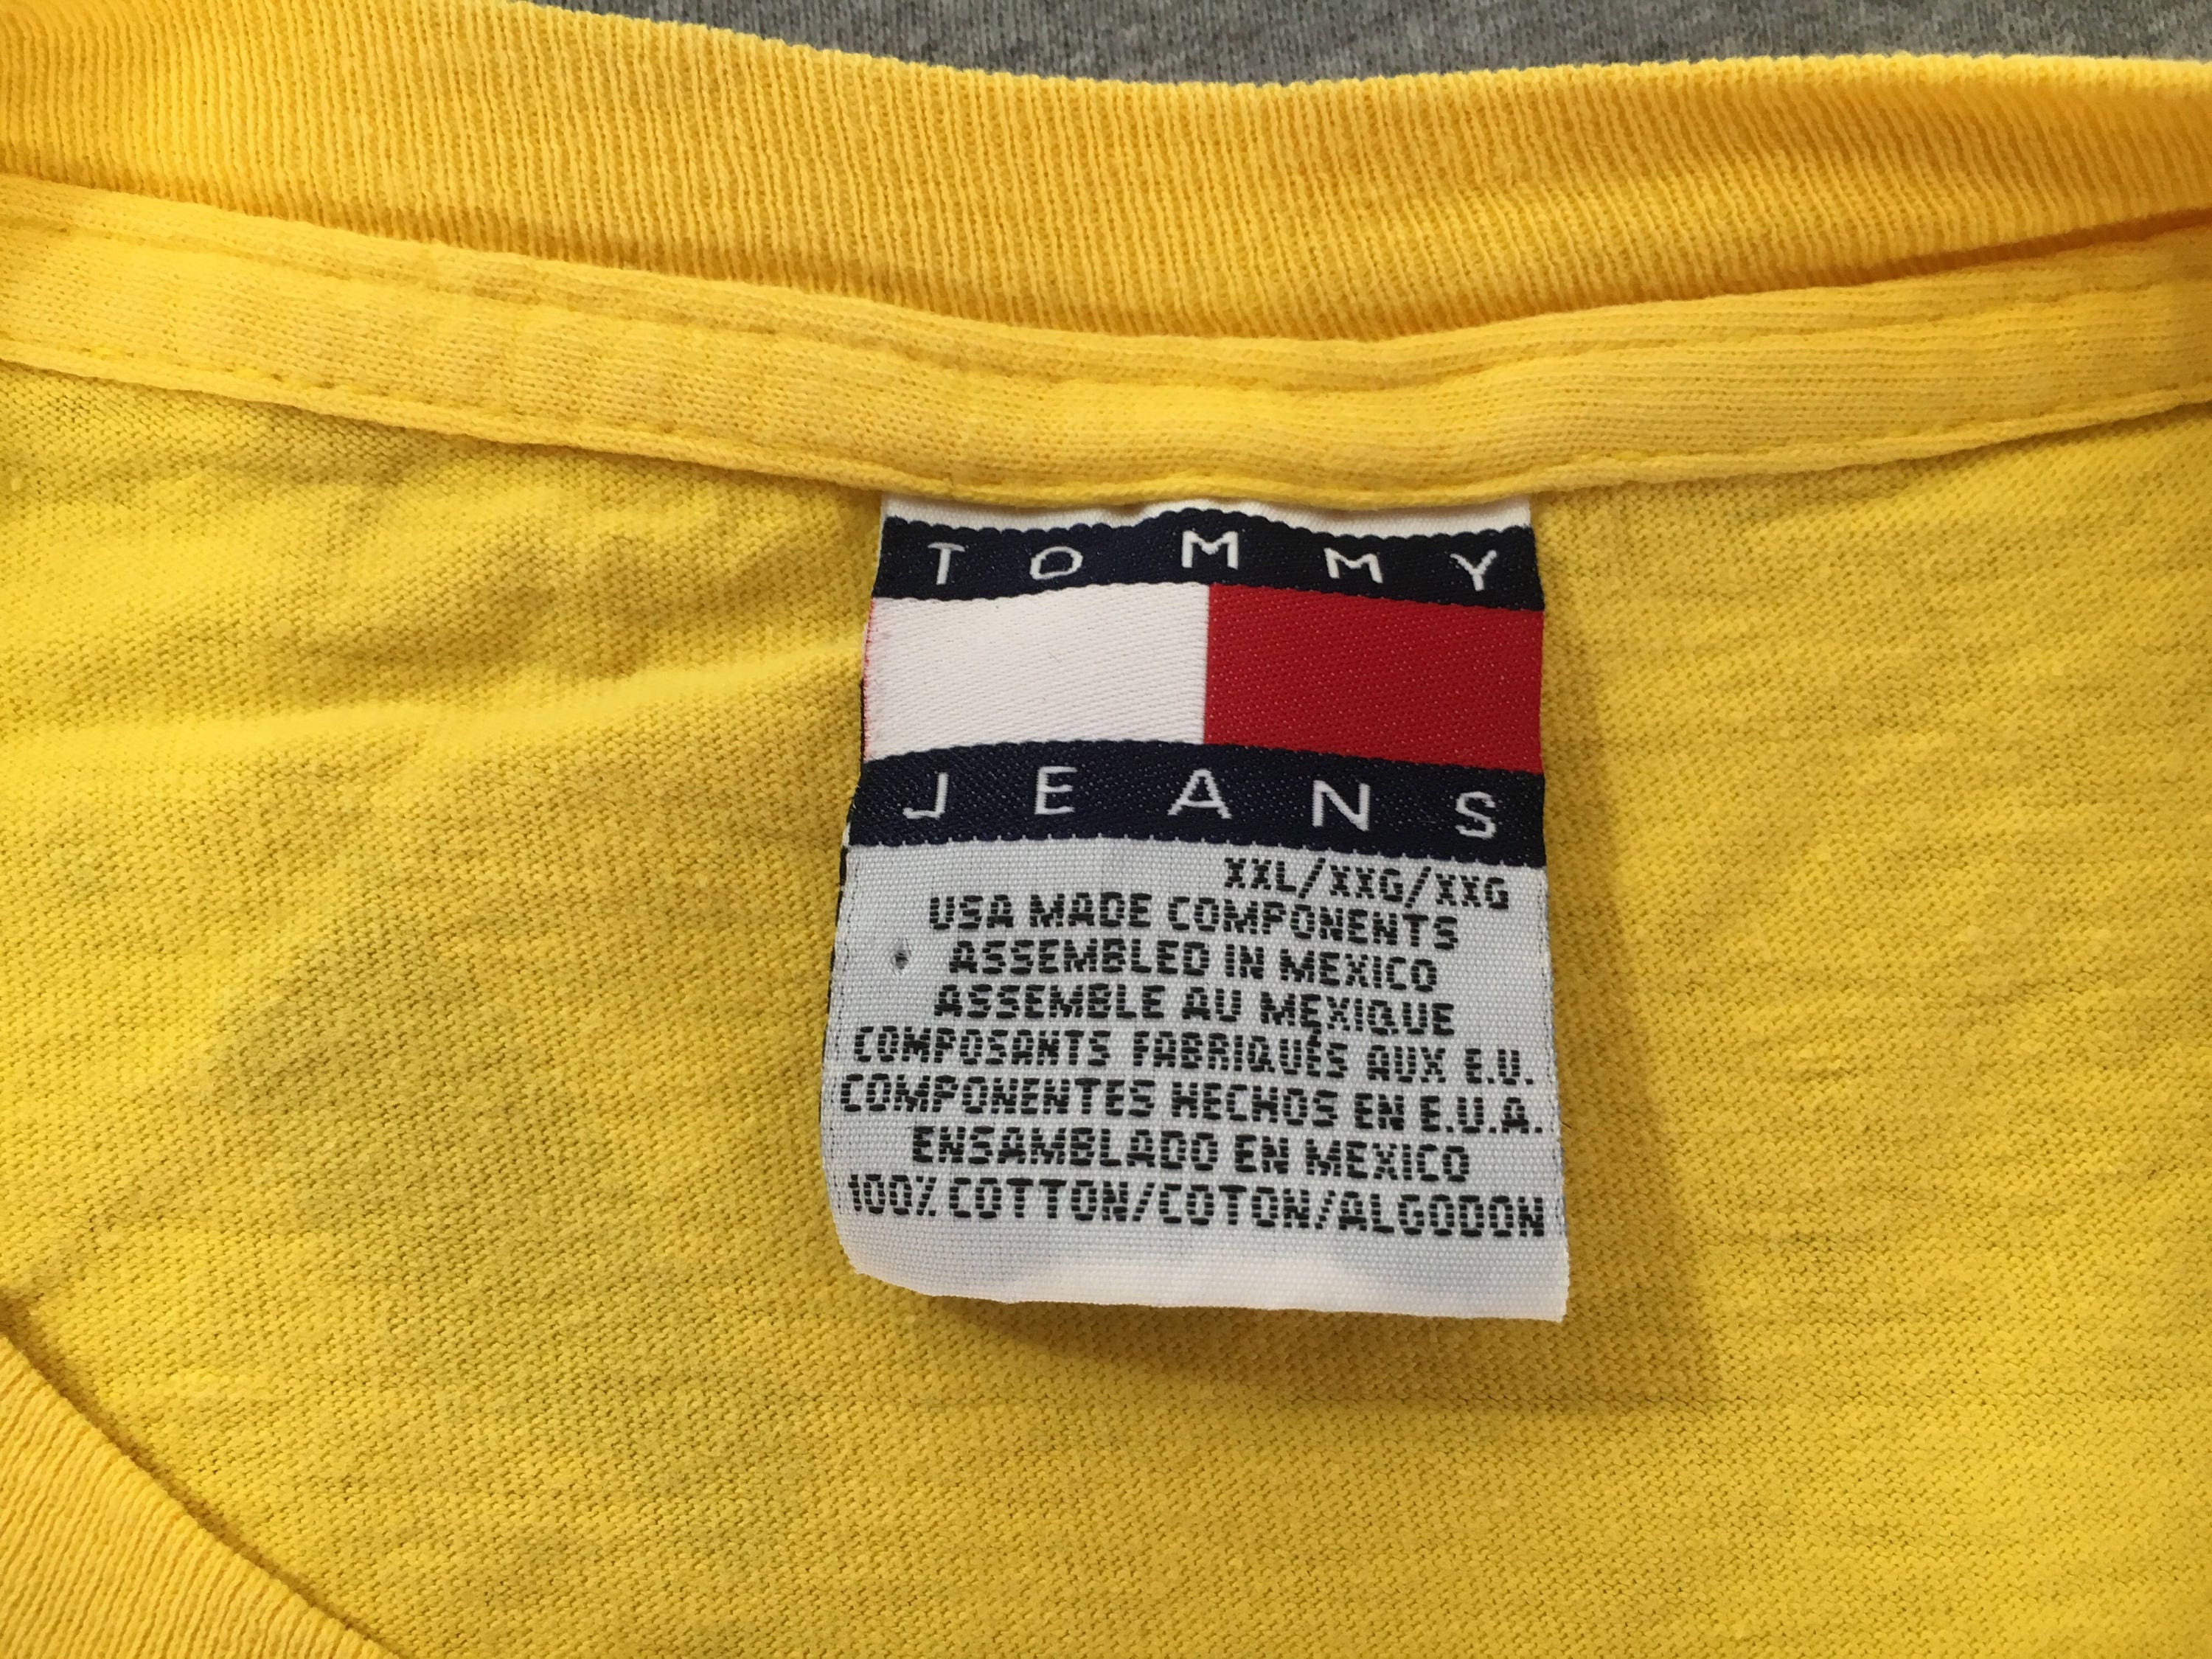 TOMMY HILFIGER Shirt 90's Vintage/ Classic Logo Yellow | Etsy